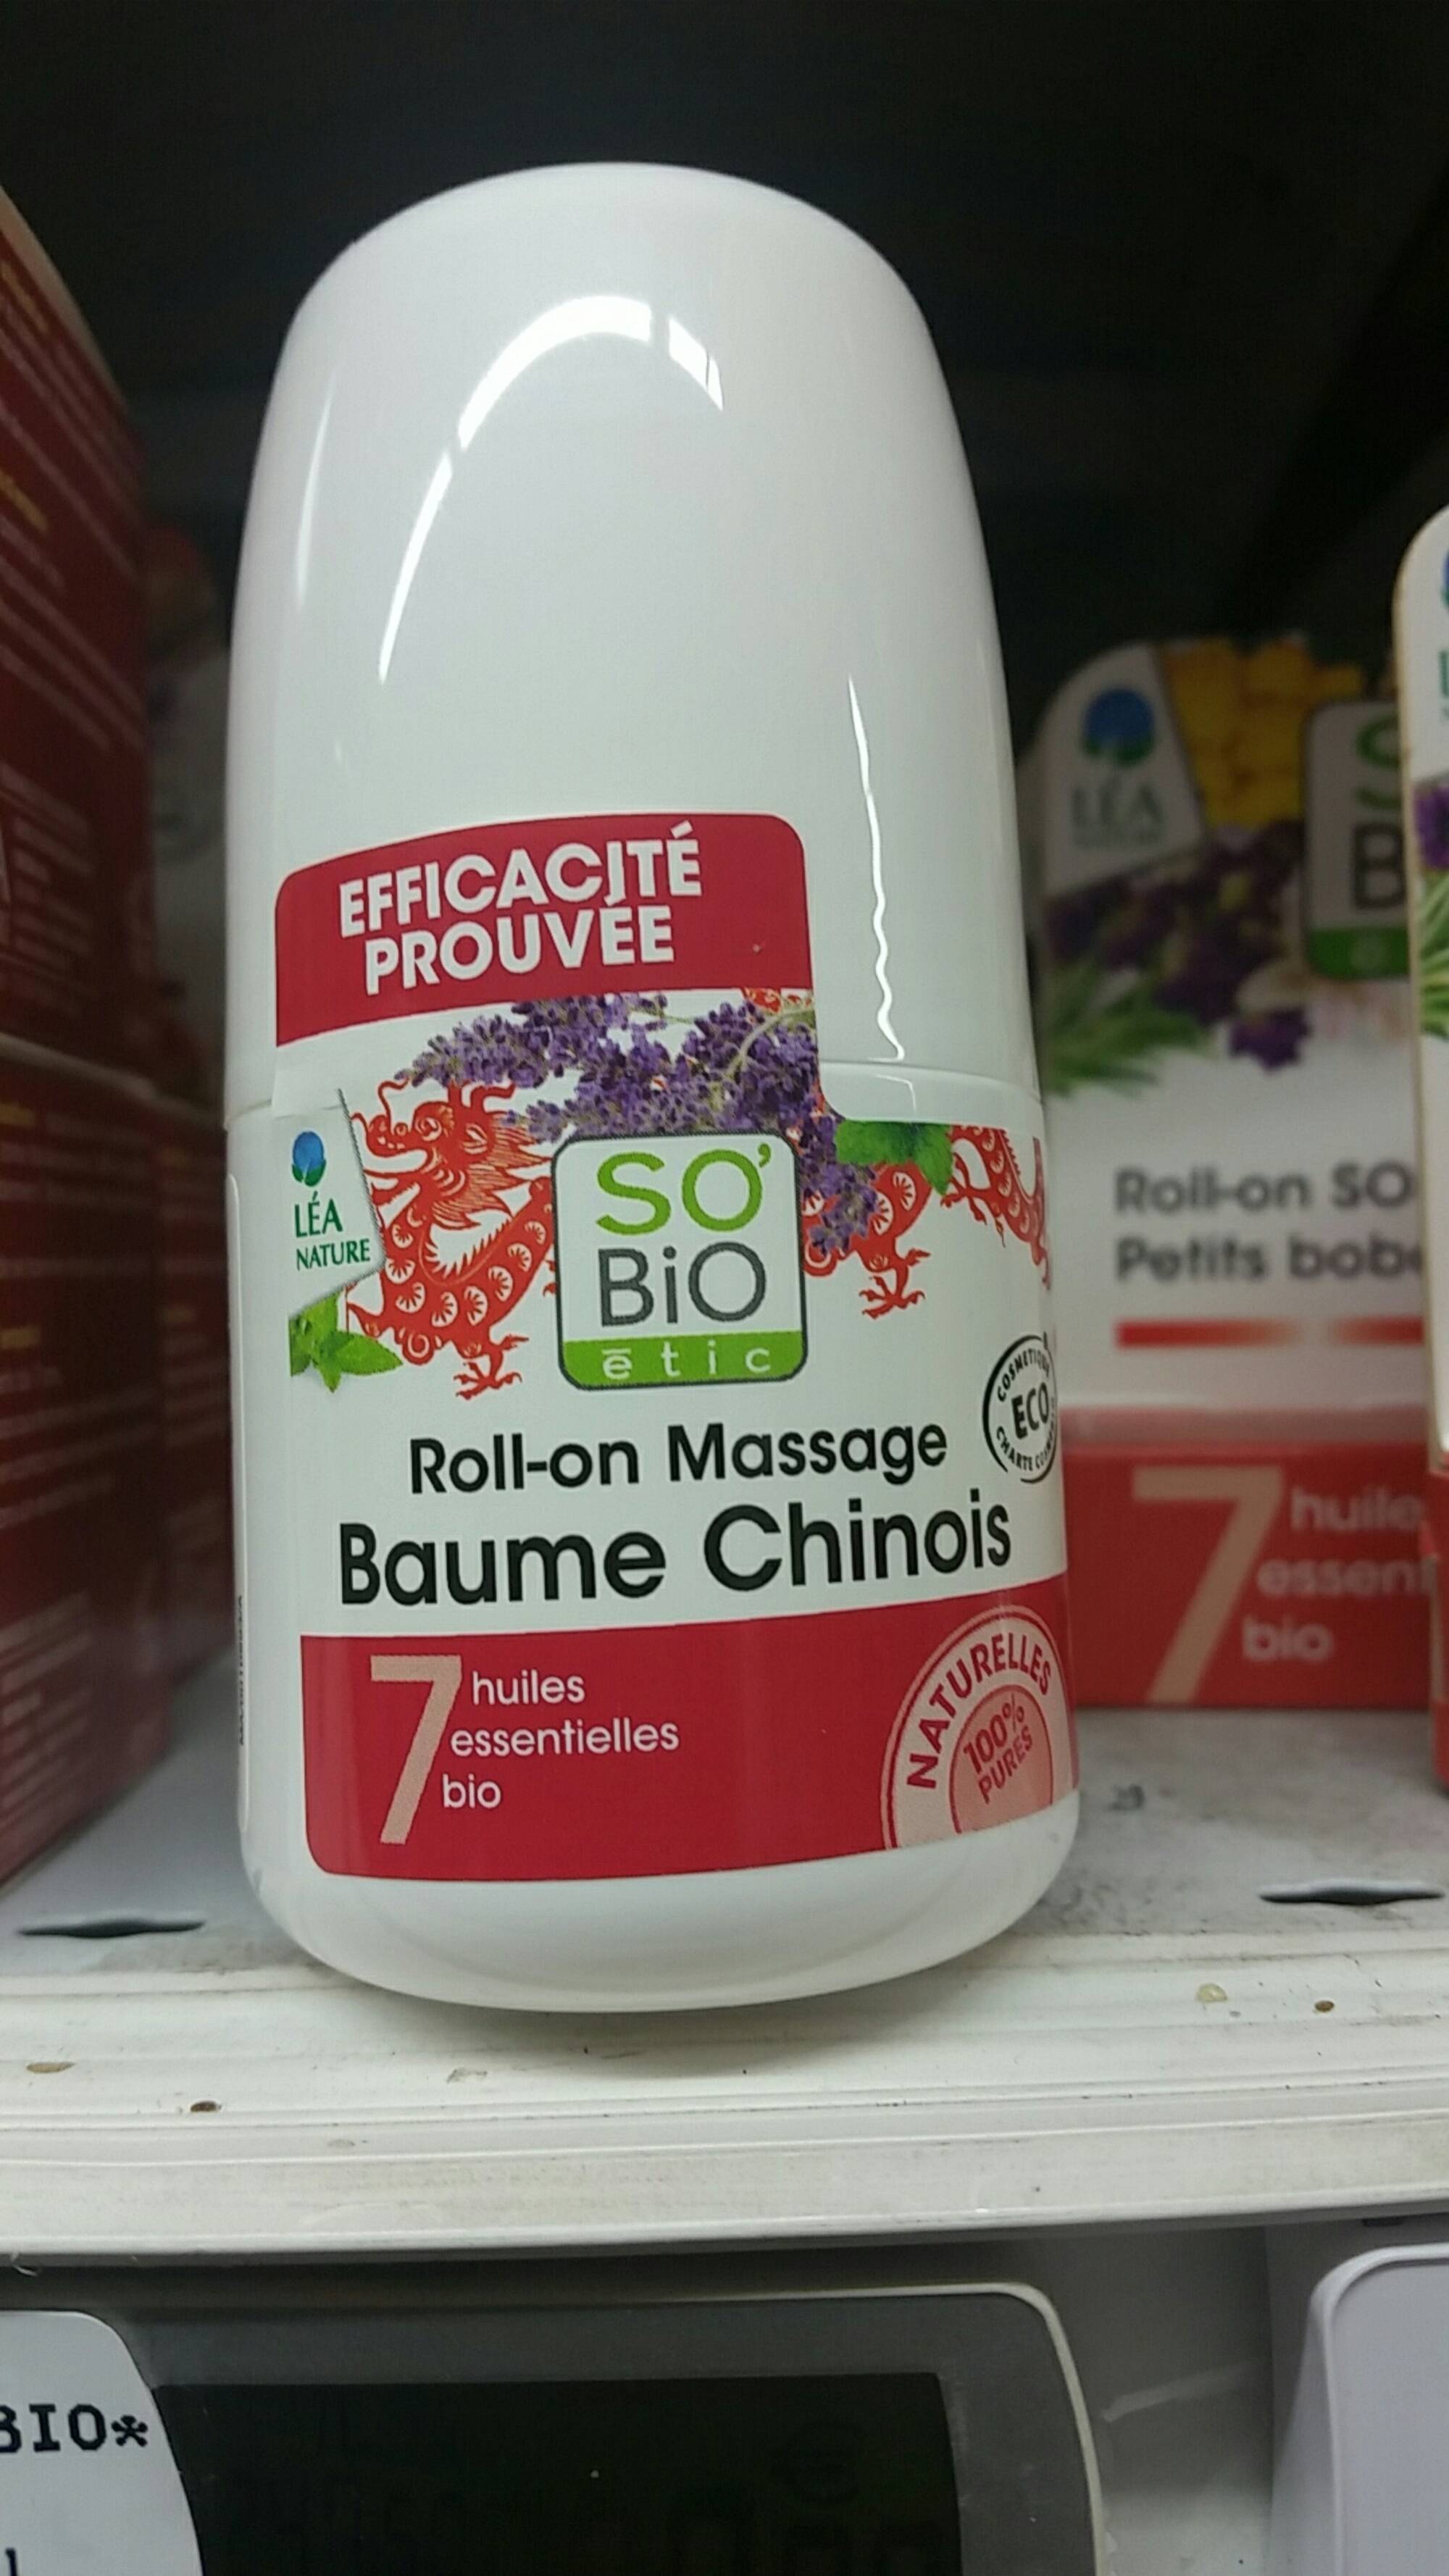 SO'BIO ÉTIC - Baume chinois - Roll-on massage